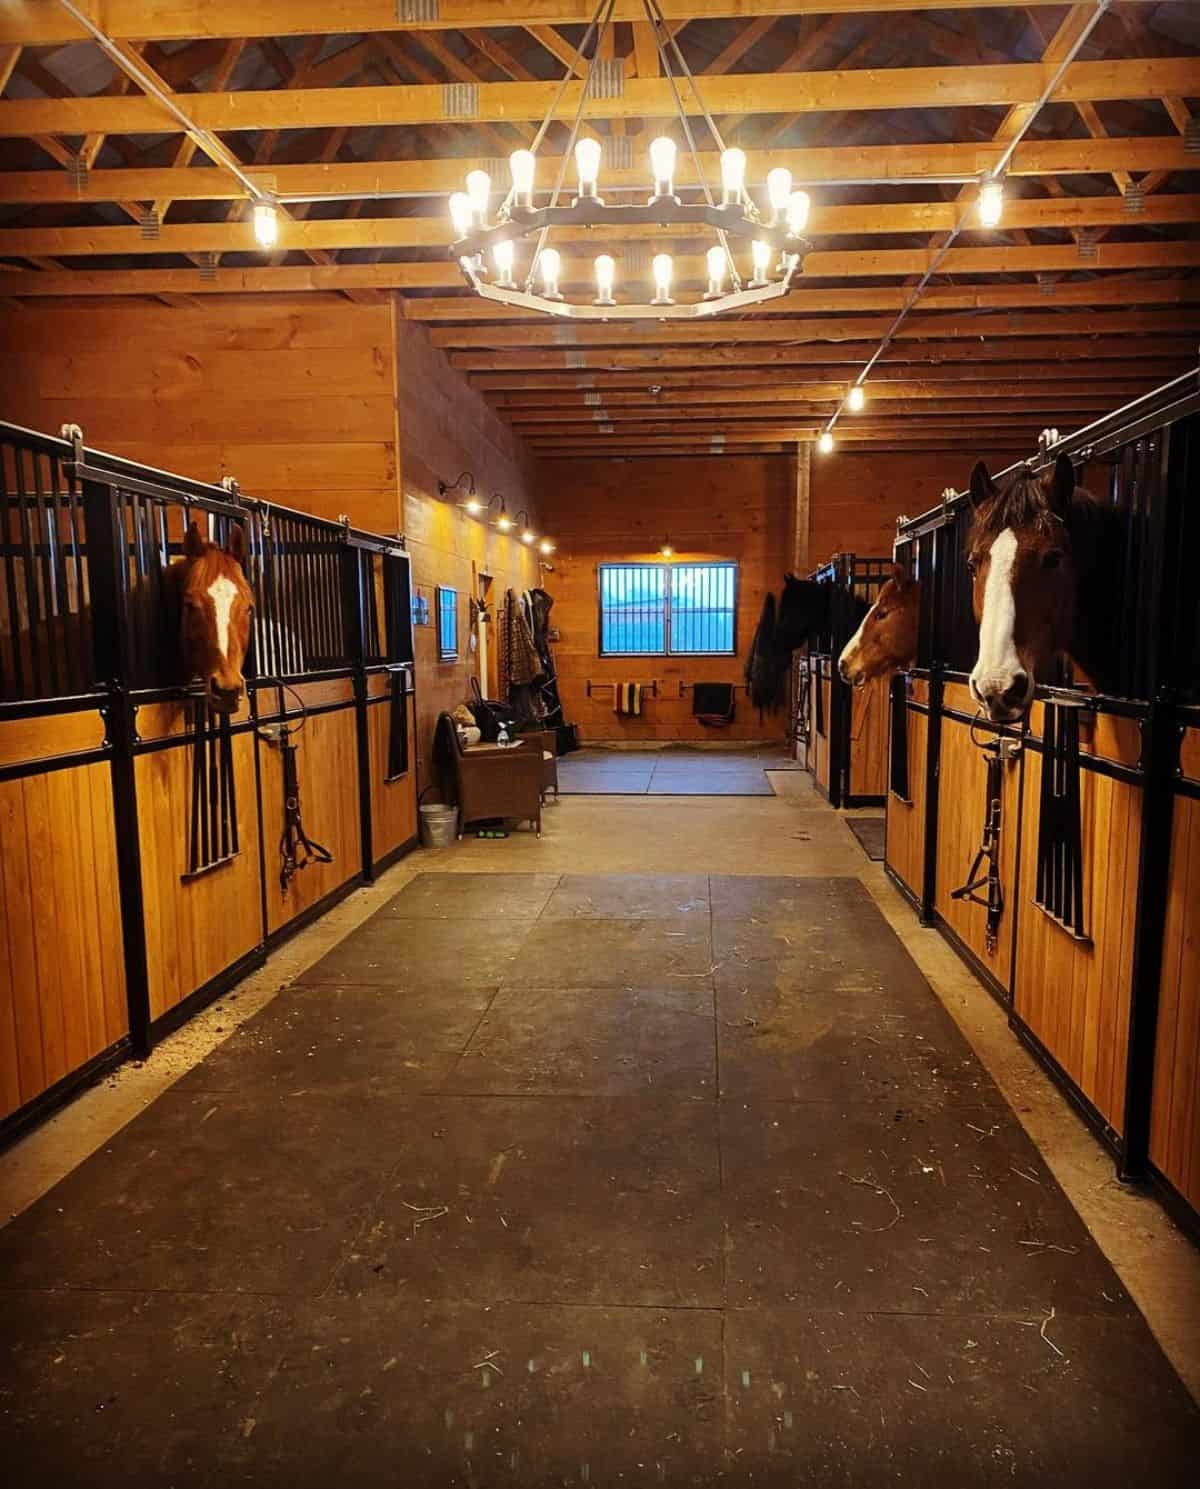 A stable full of horses decorated for a birthday party.